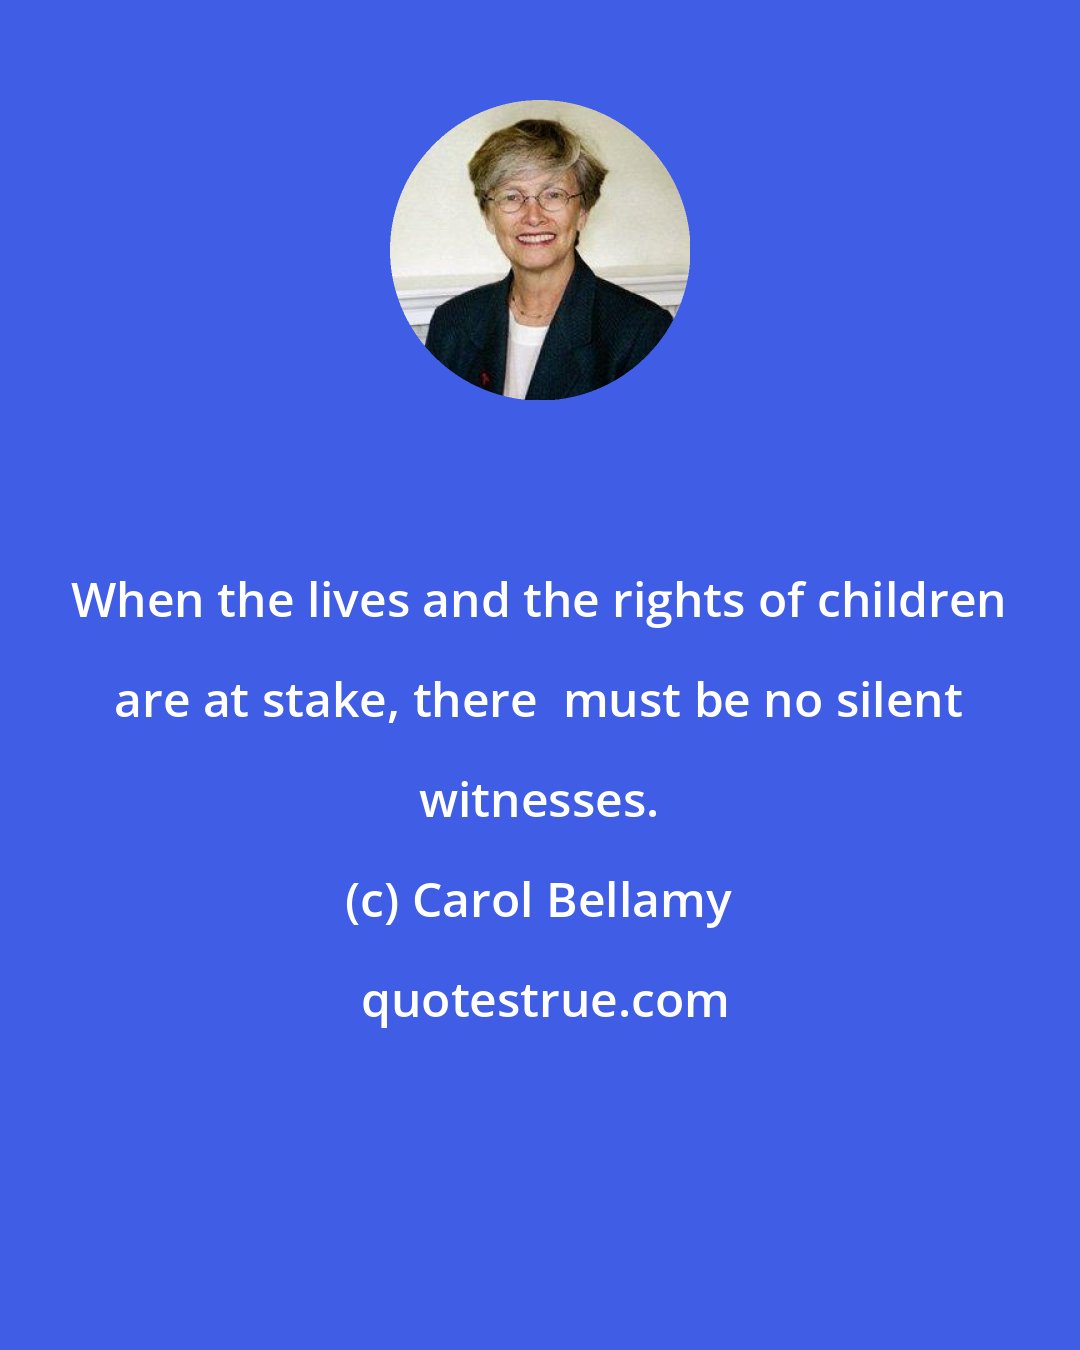 Carol Bellamy: When the lives and the rights of children are at stake, there  must be no silent witnesses.